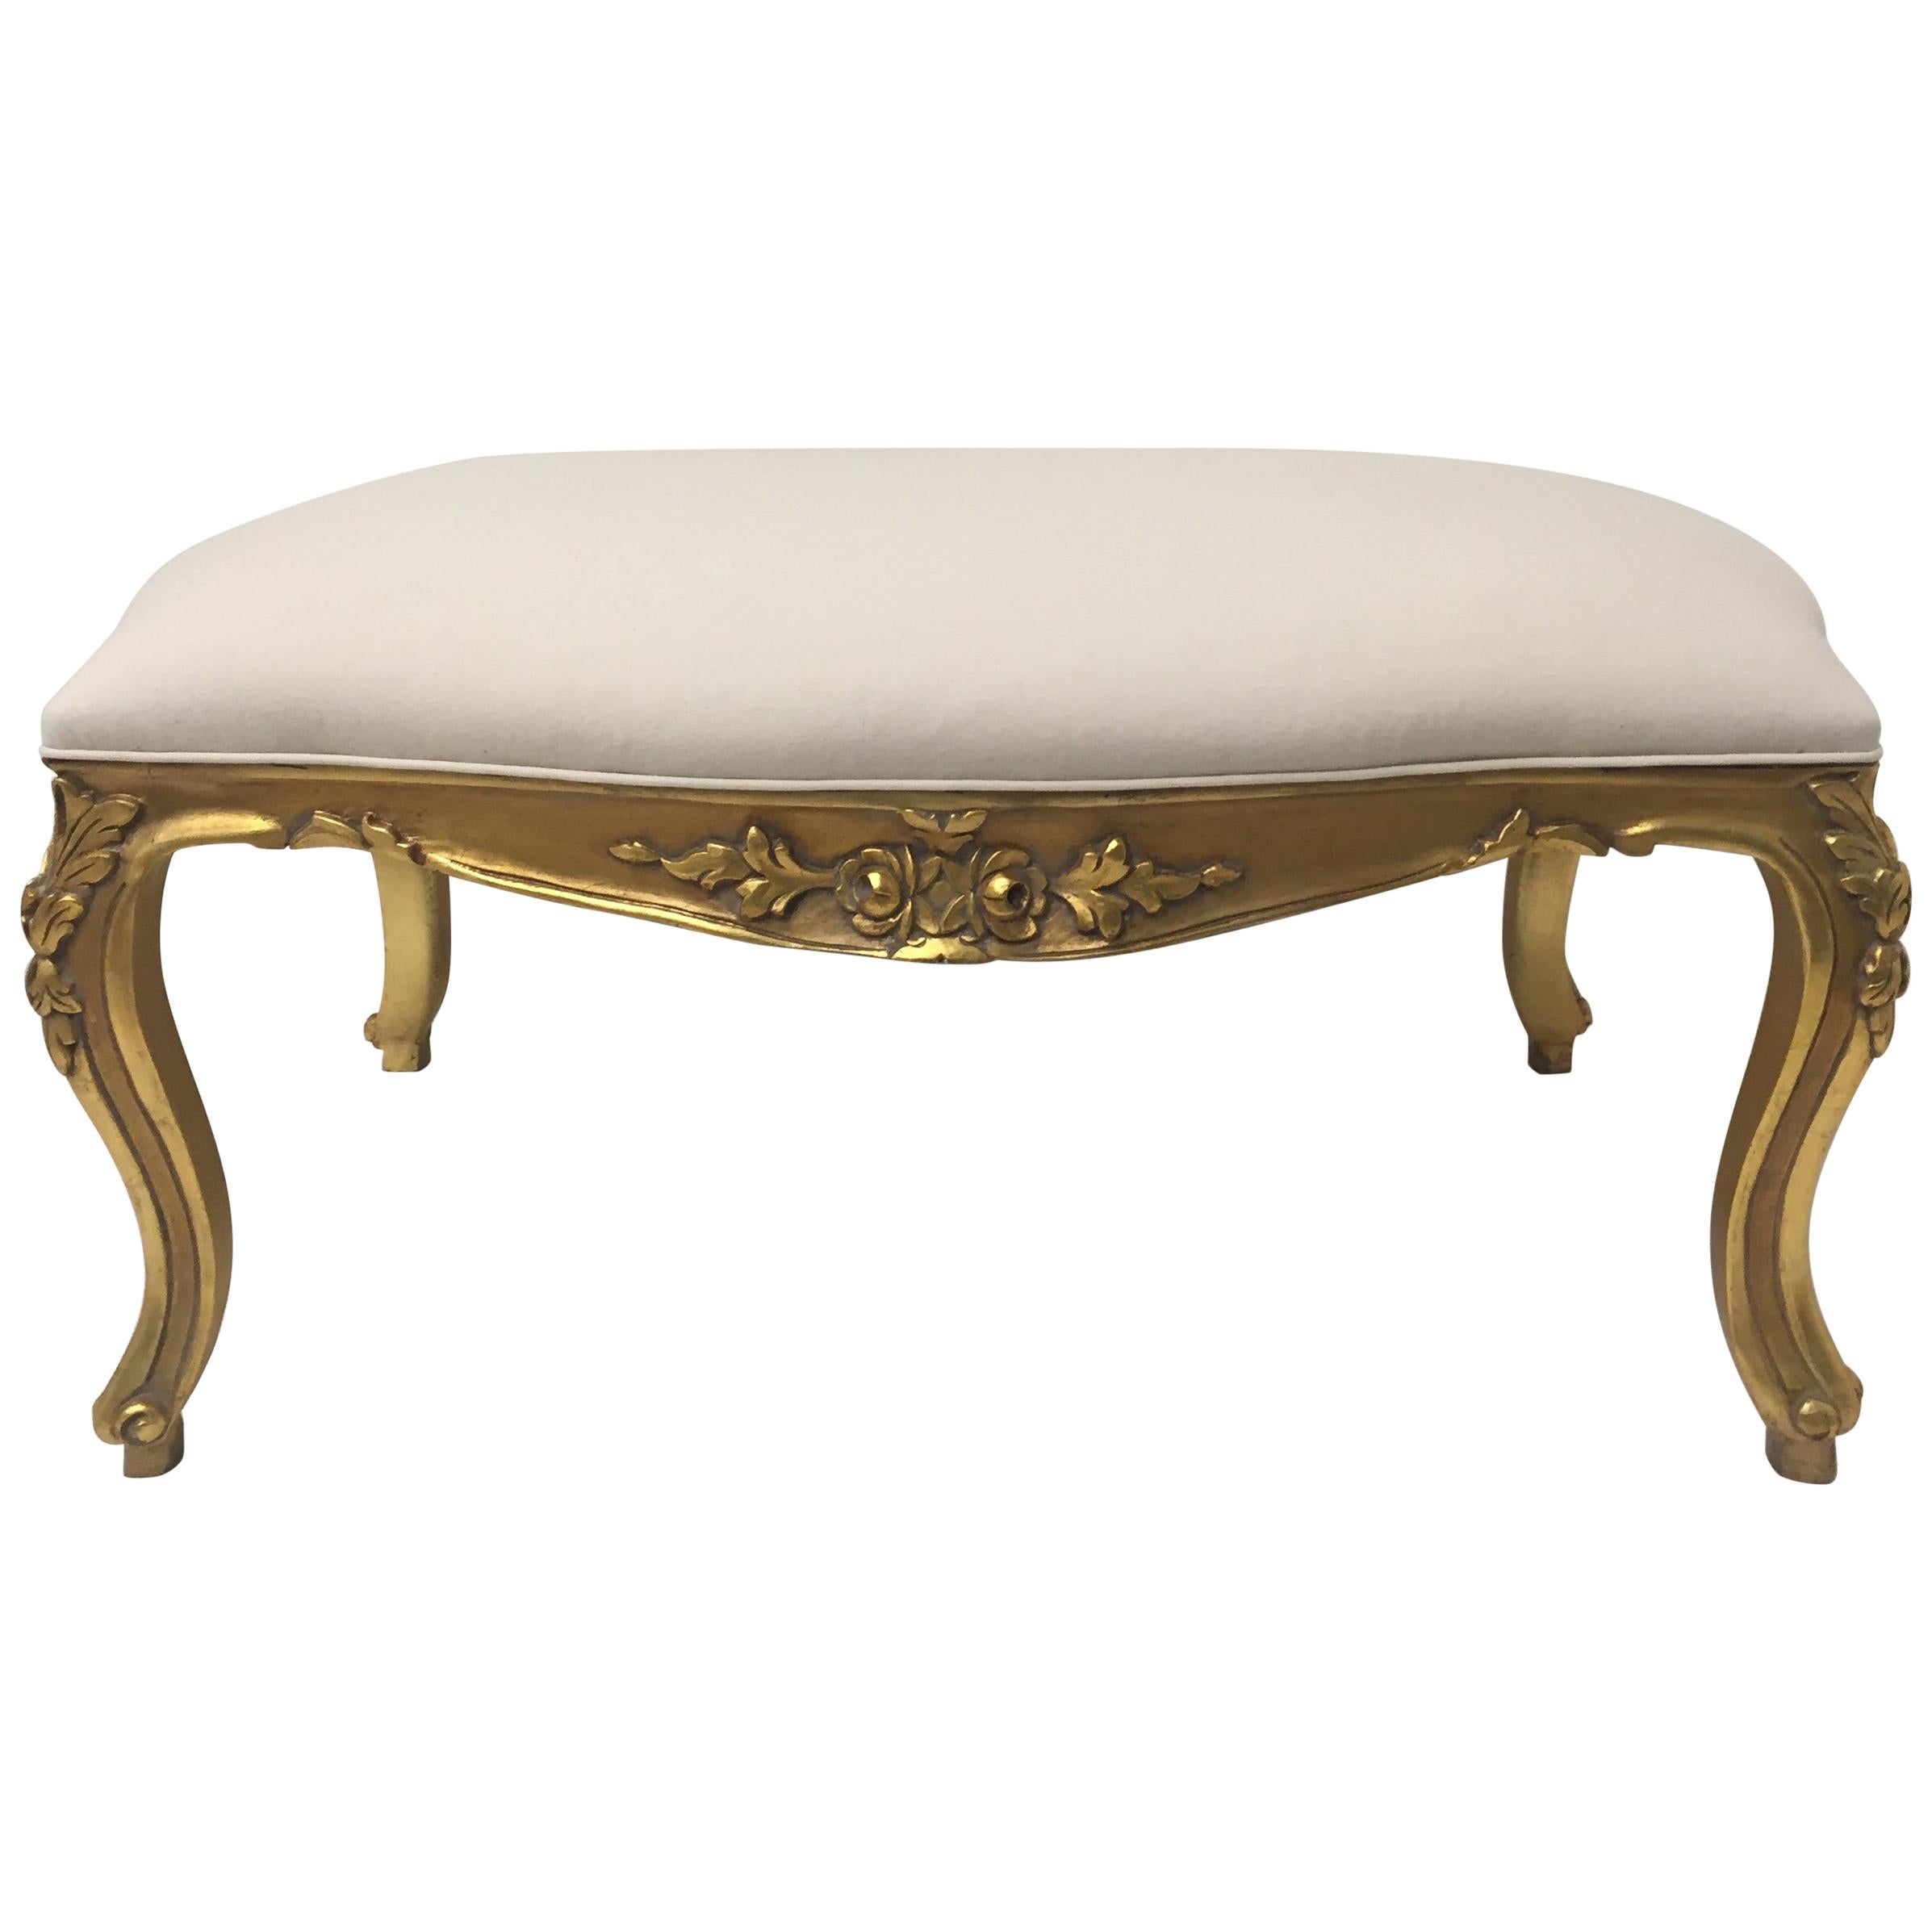 French Carved Giltwood Bench with New Cotton Duck Upholstery